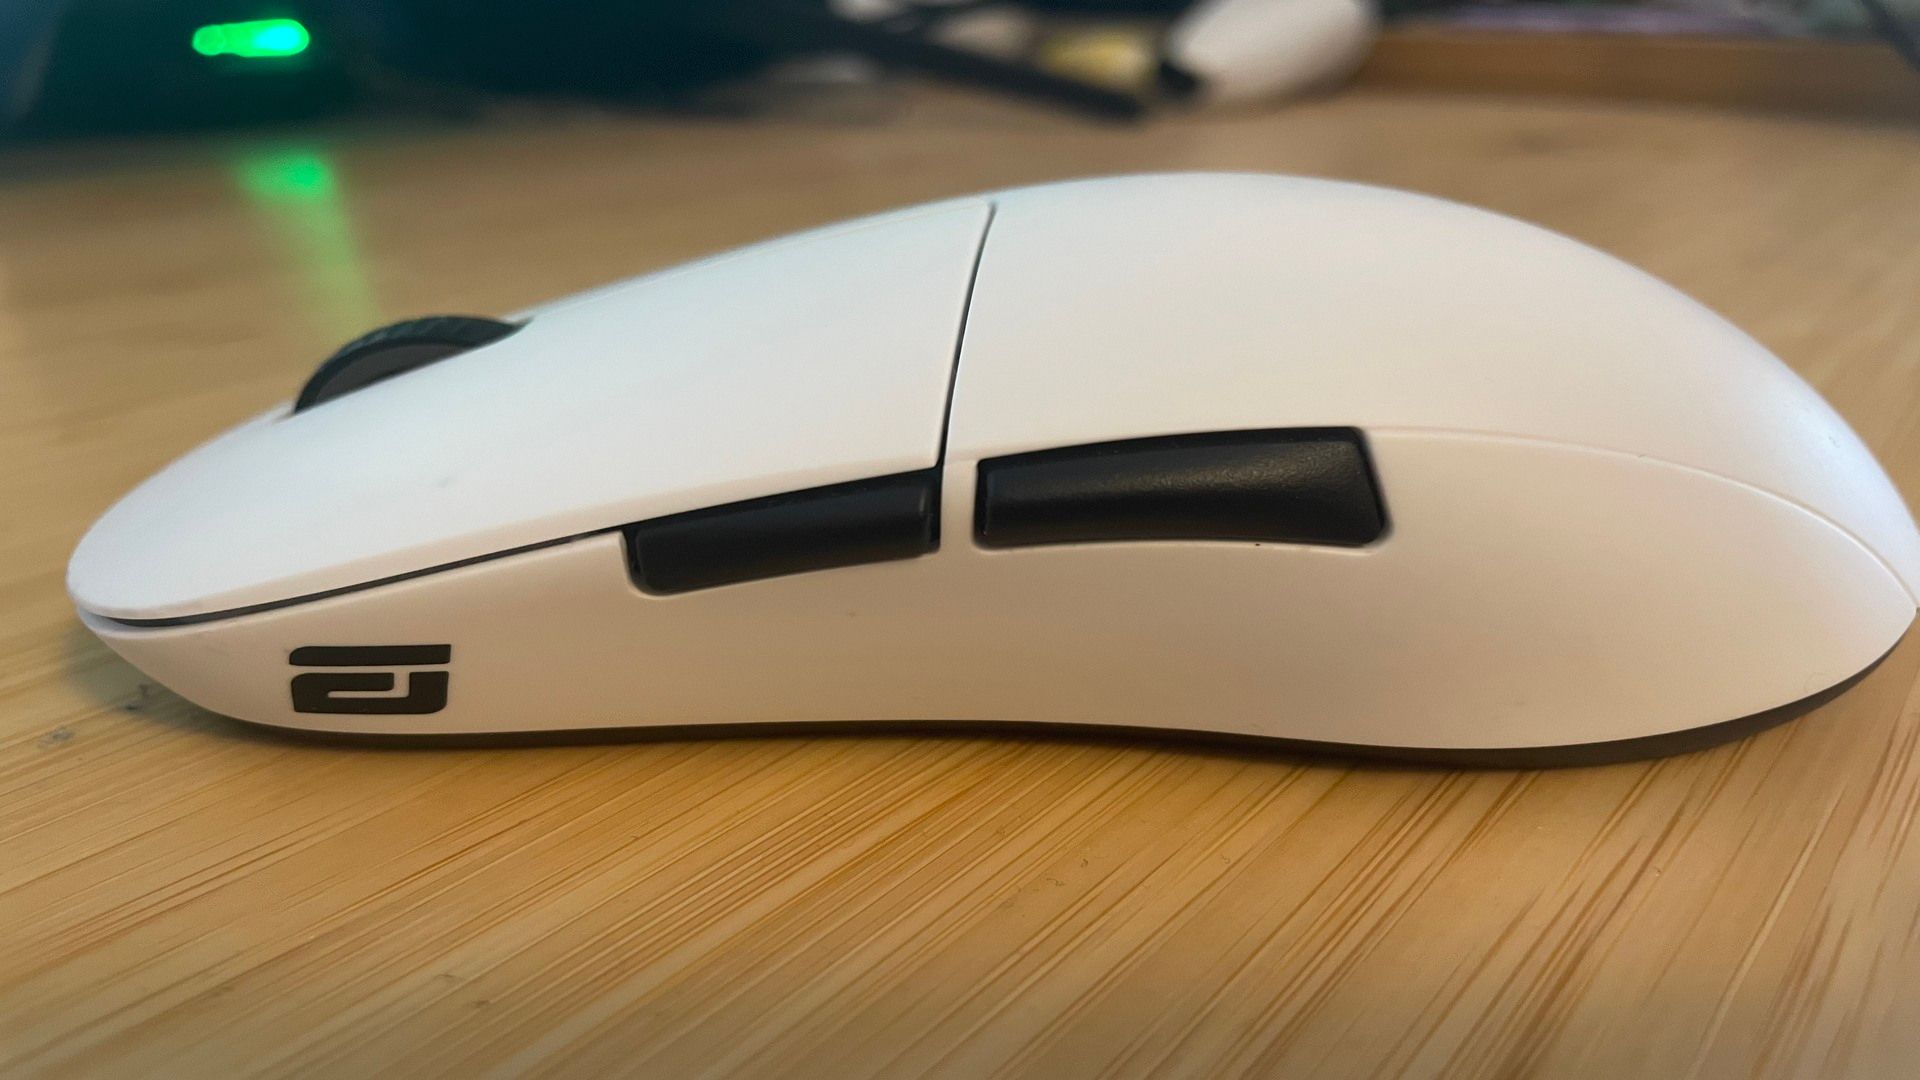 Endgame Gear XM2WE wireless mouse review - Brilliant and on